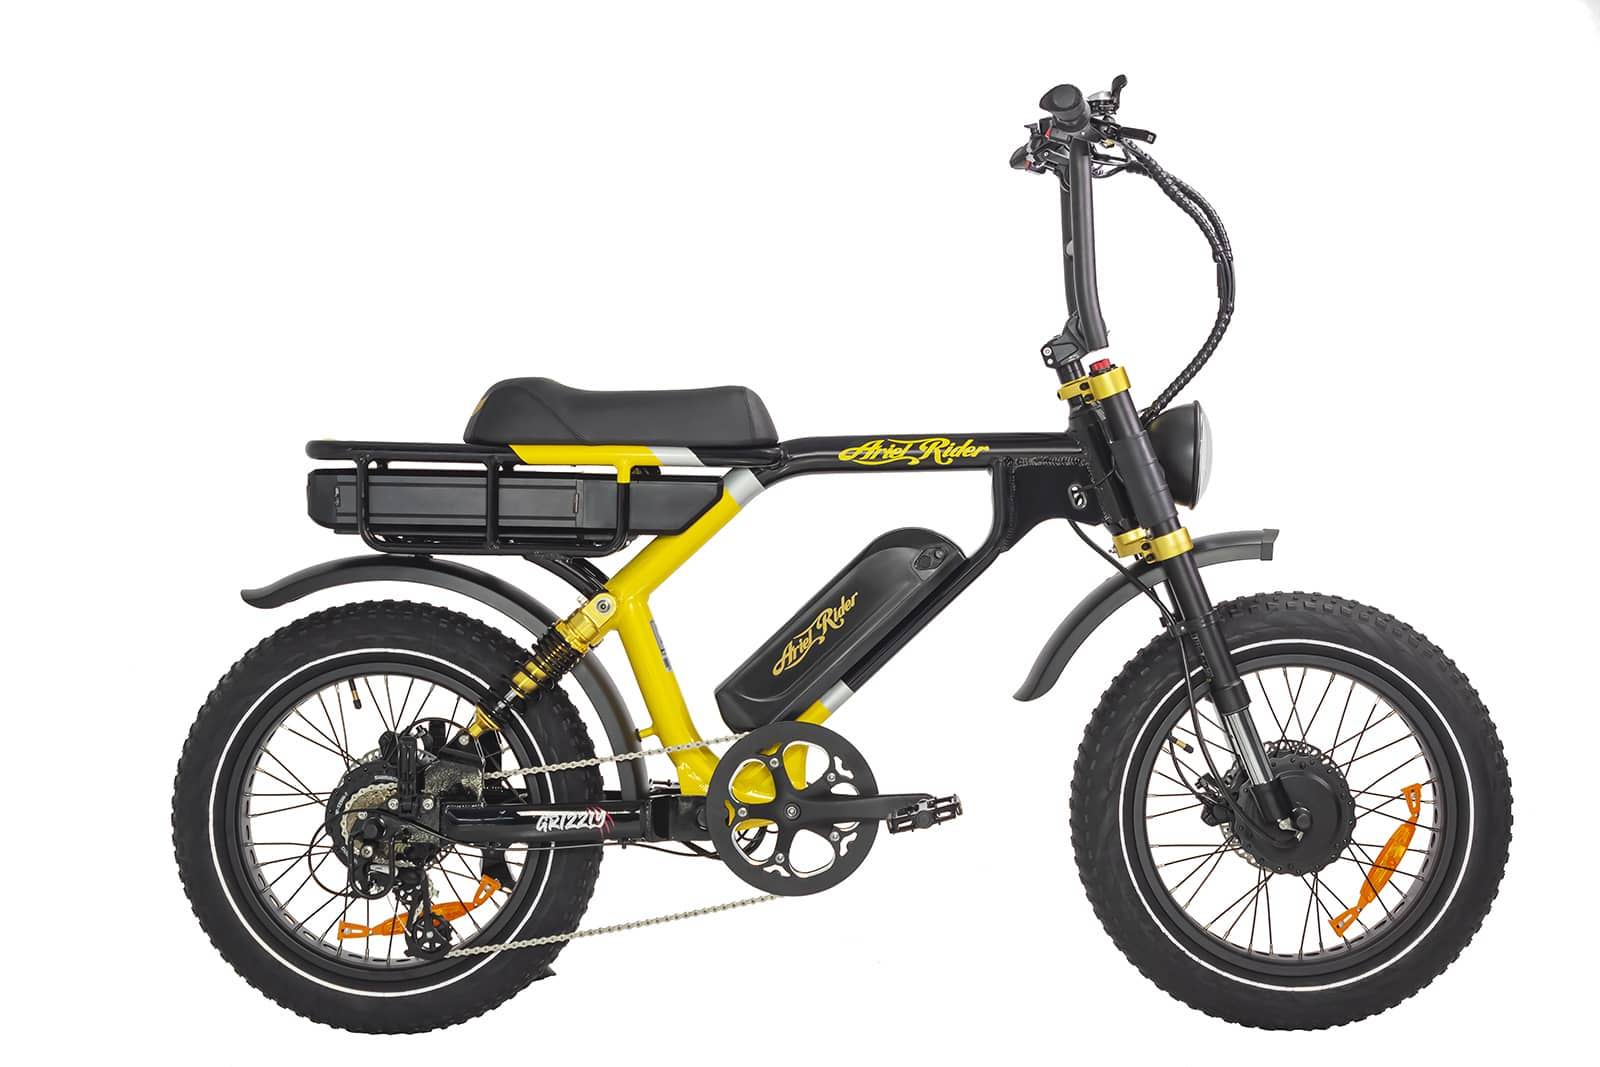 Grizzly, Dual Motor Dual Battery Full Suspension Fat Tire Electric Bike